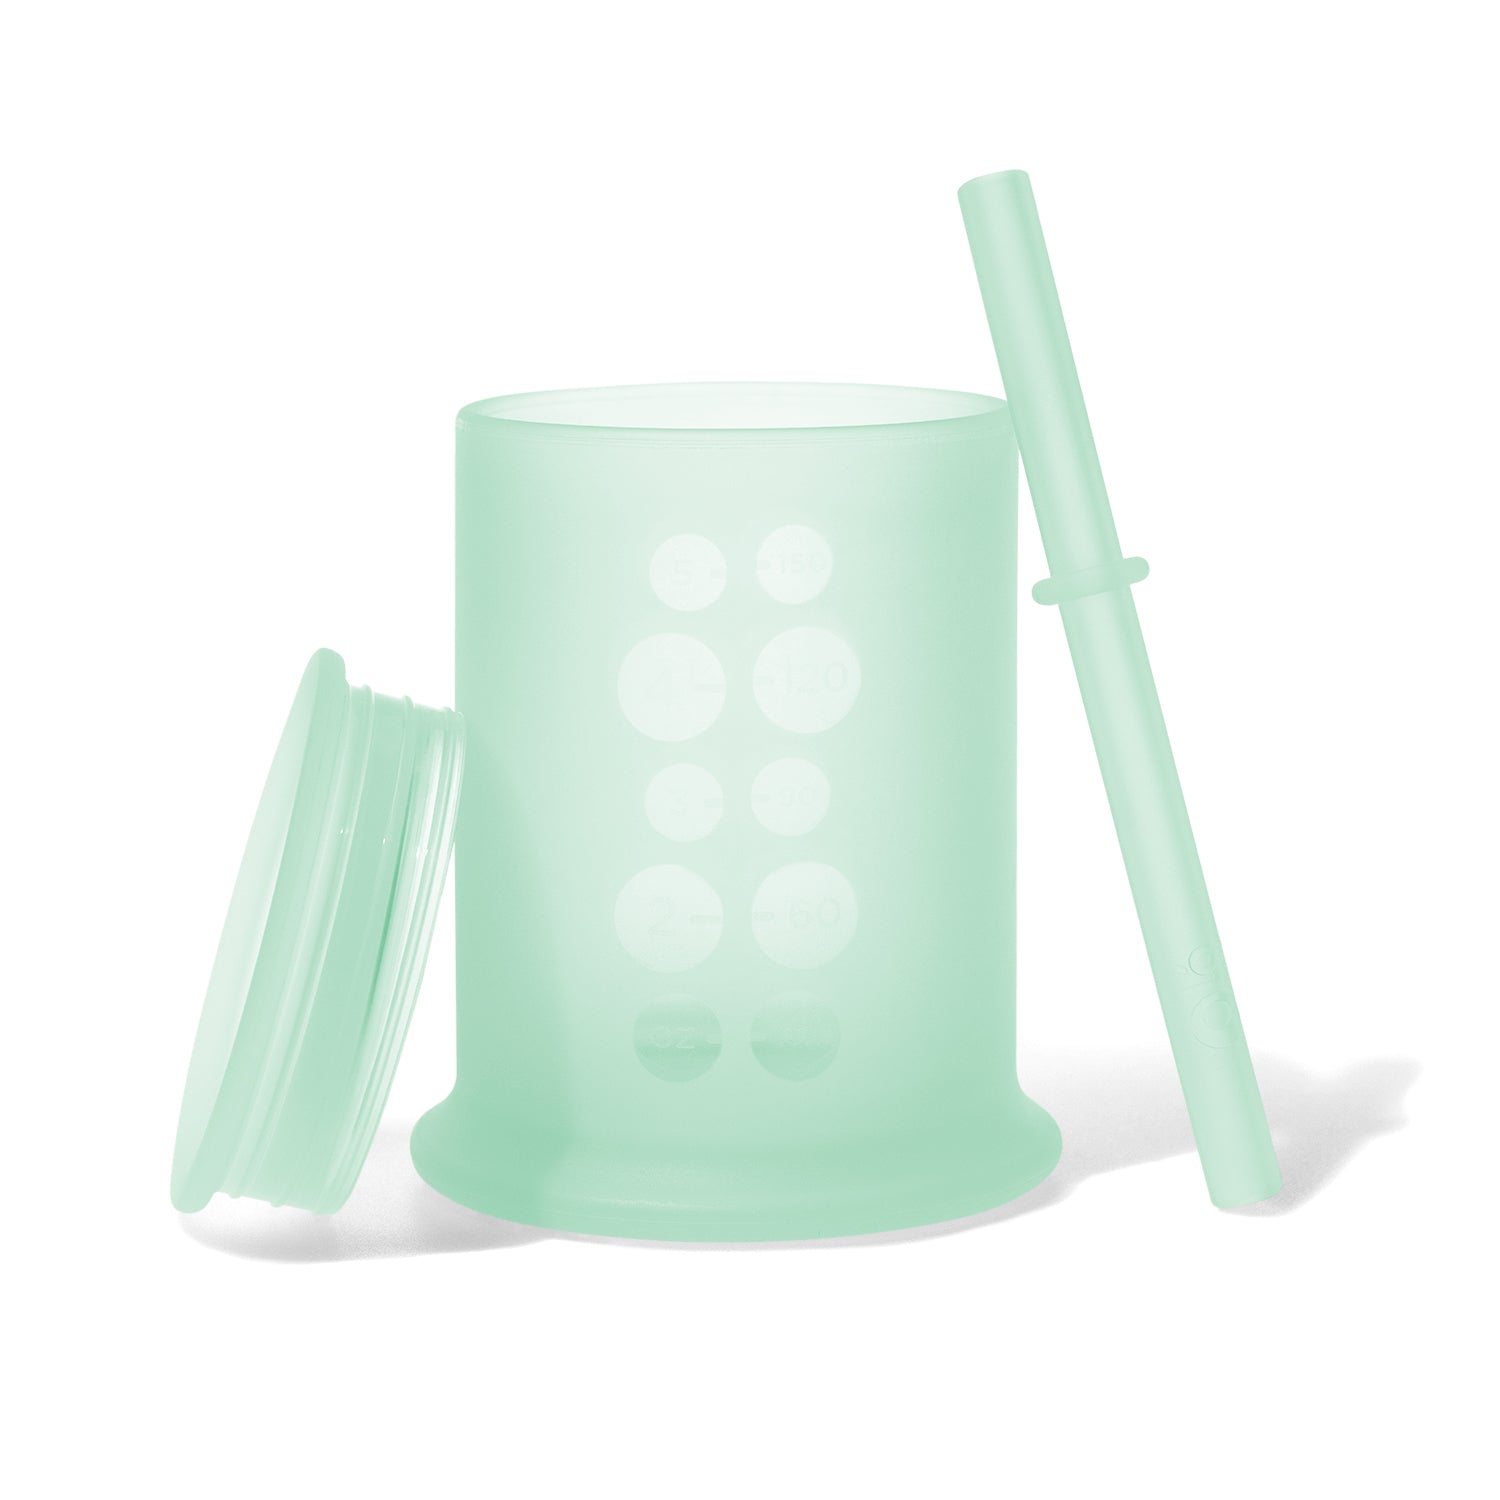 Lieonvis Silicone Sippy Cup Training for Baby 6 months+ Soft with